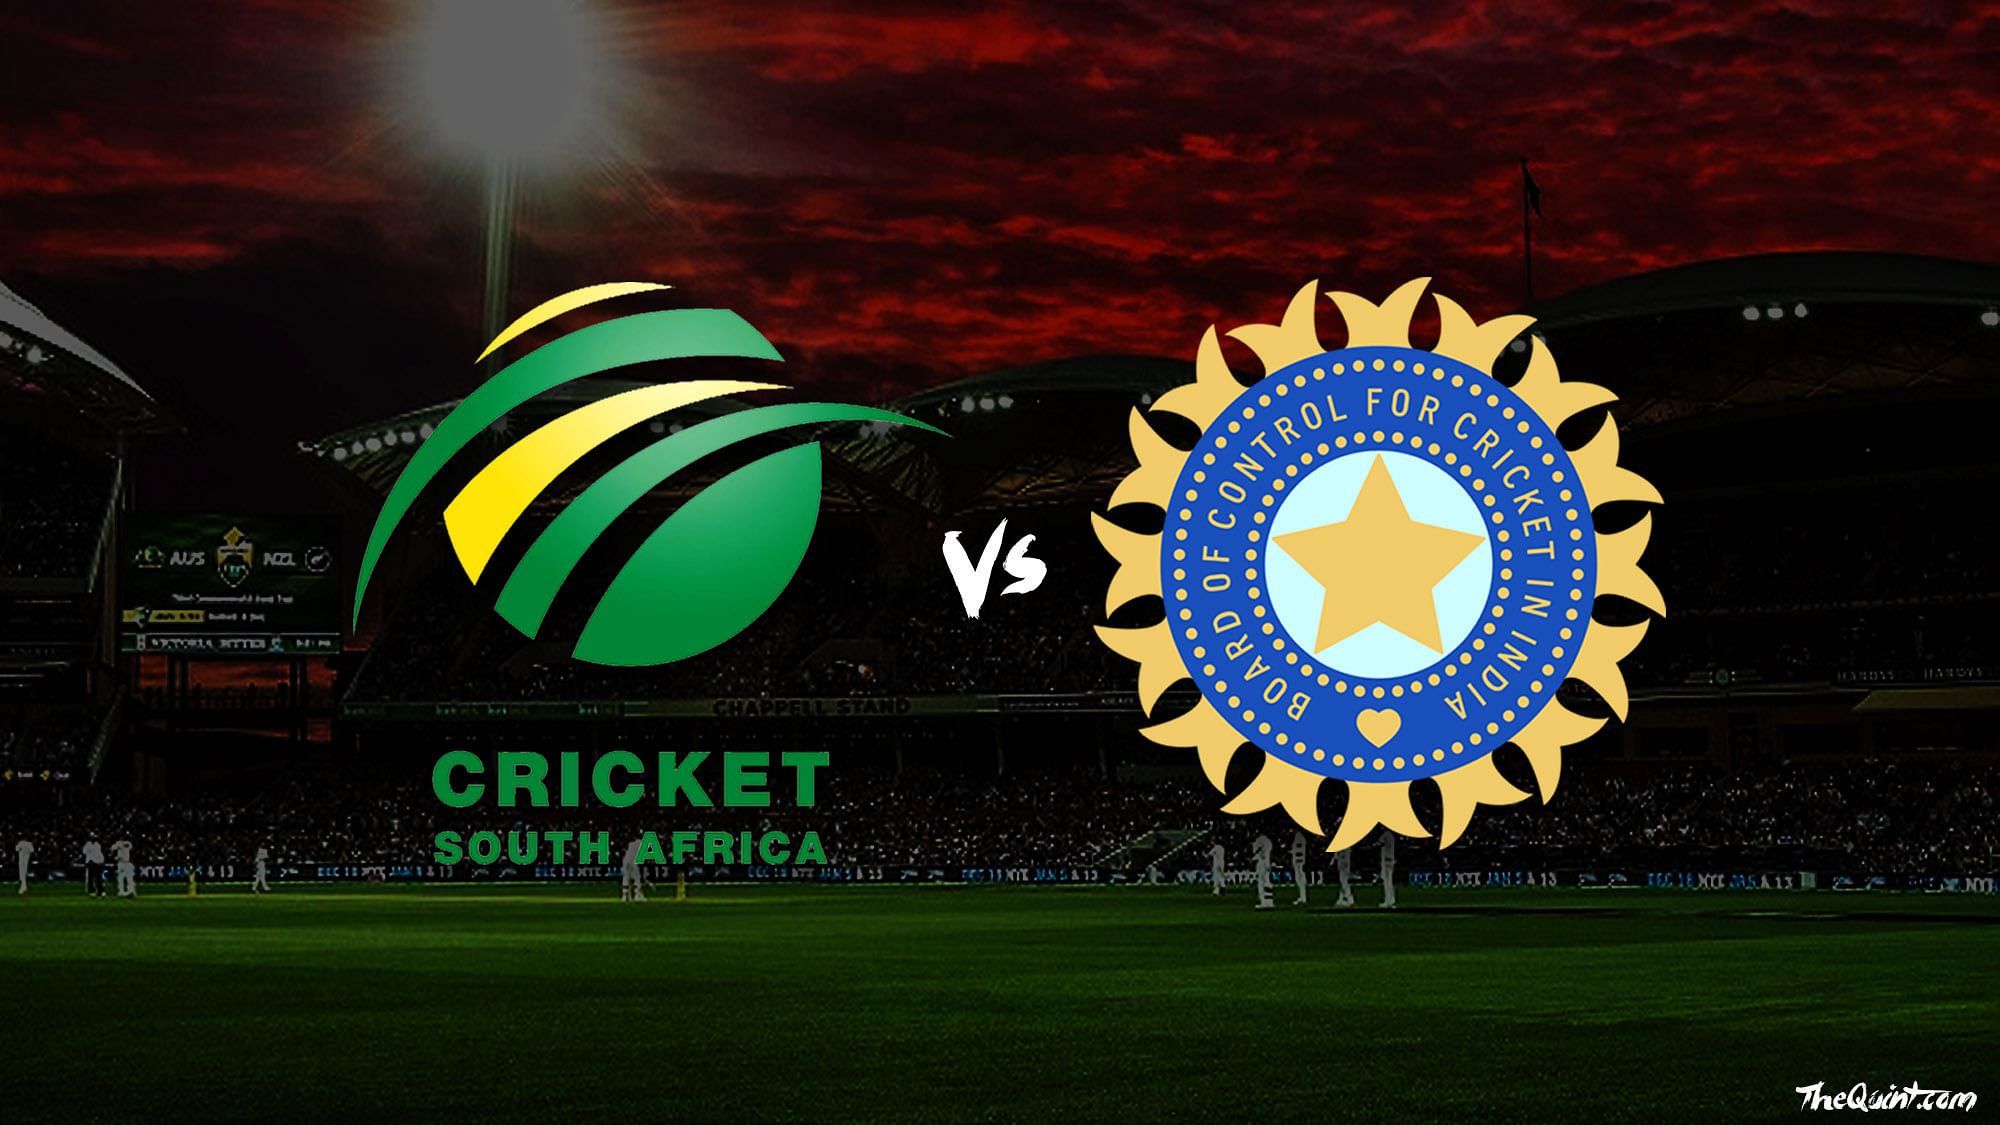 India vs South Africa full schedule was announced by Cricket South Africa on 27 September.